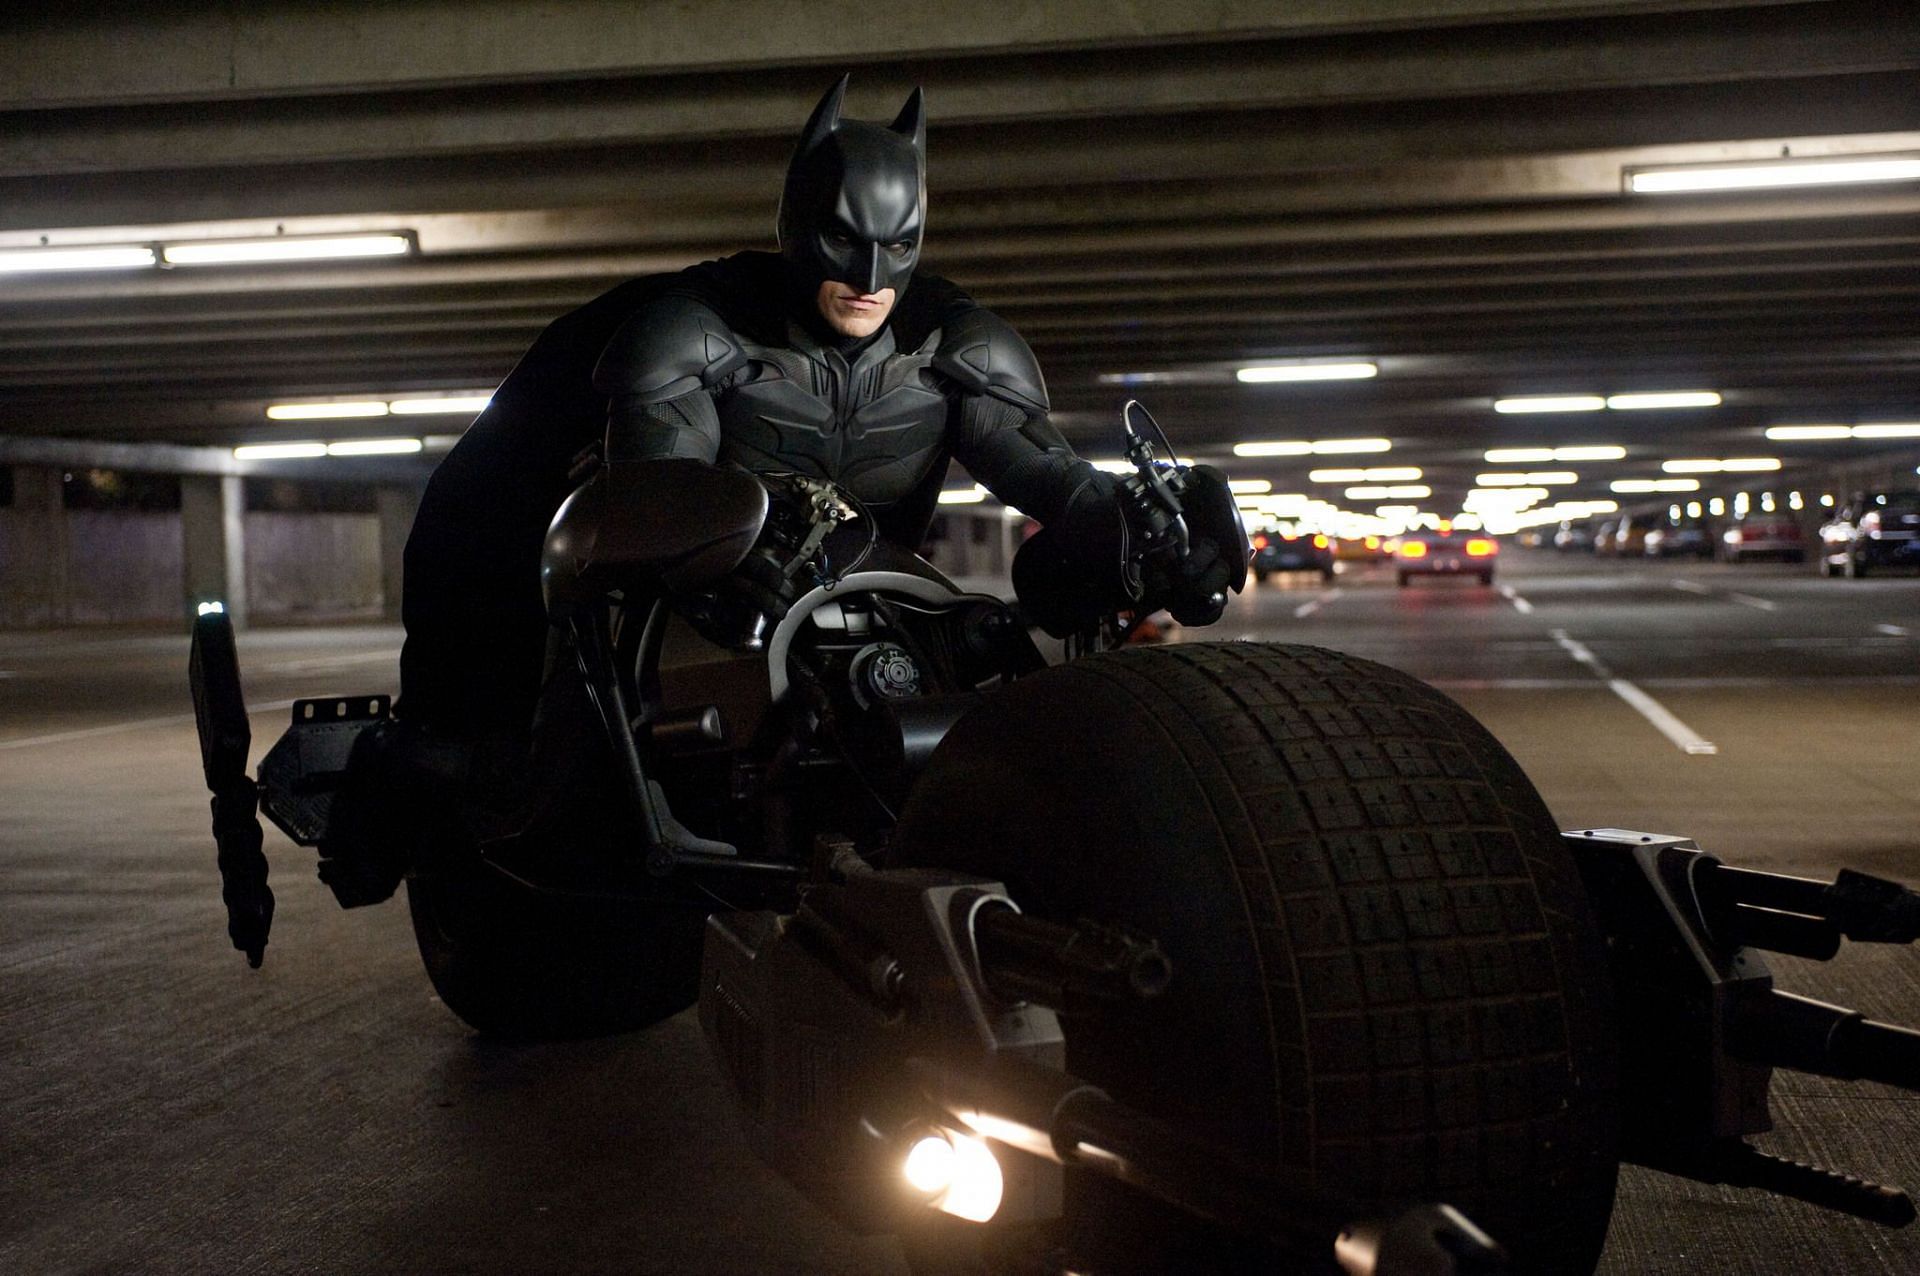 Batman-centric: Is the series missing out on character development? (Image via Warner Bros)